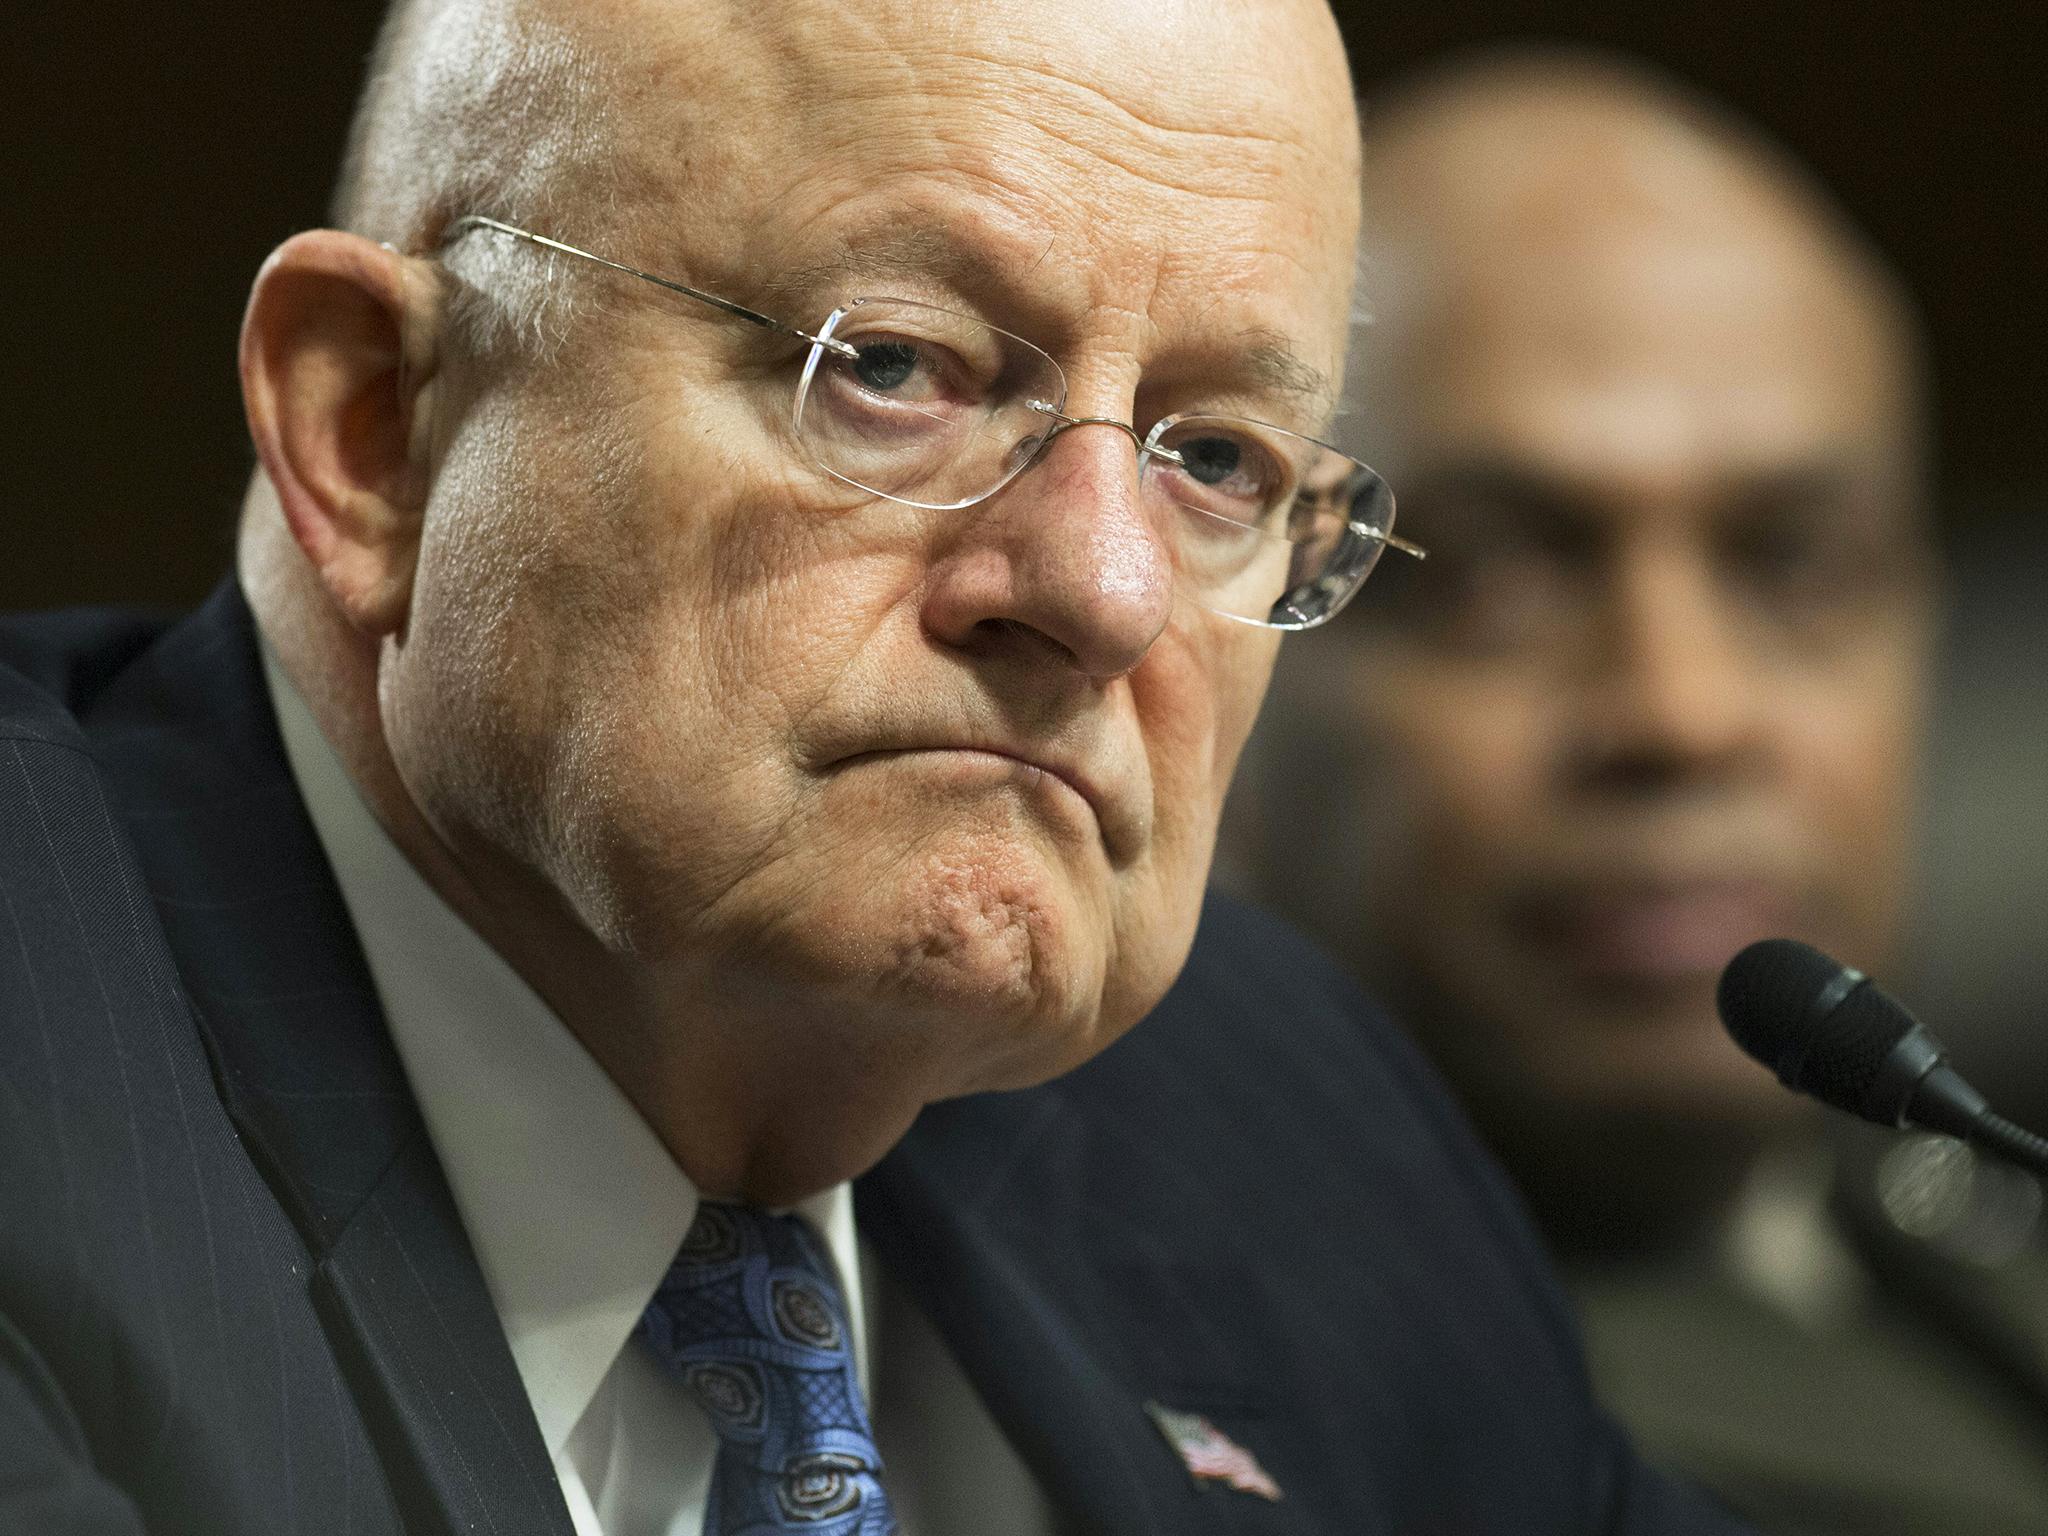 James Clapper has resigned as US director of national intelligence